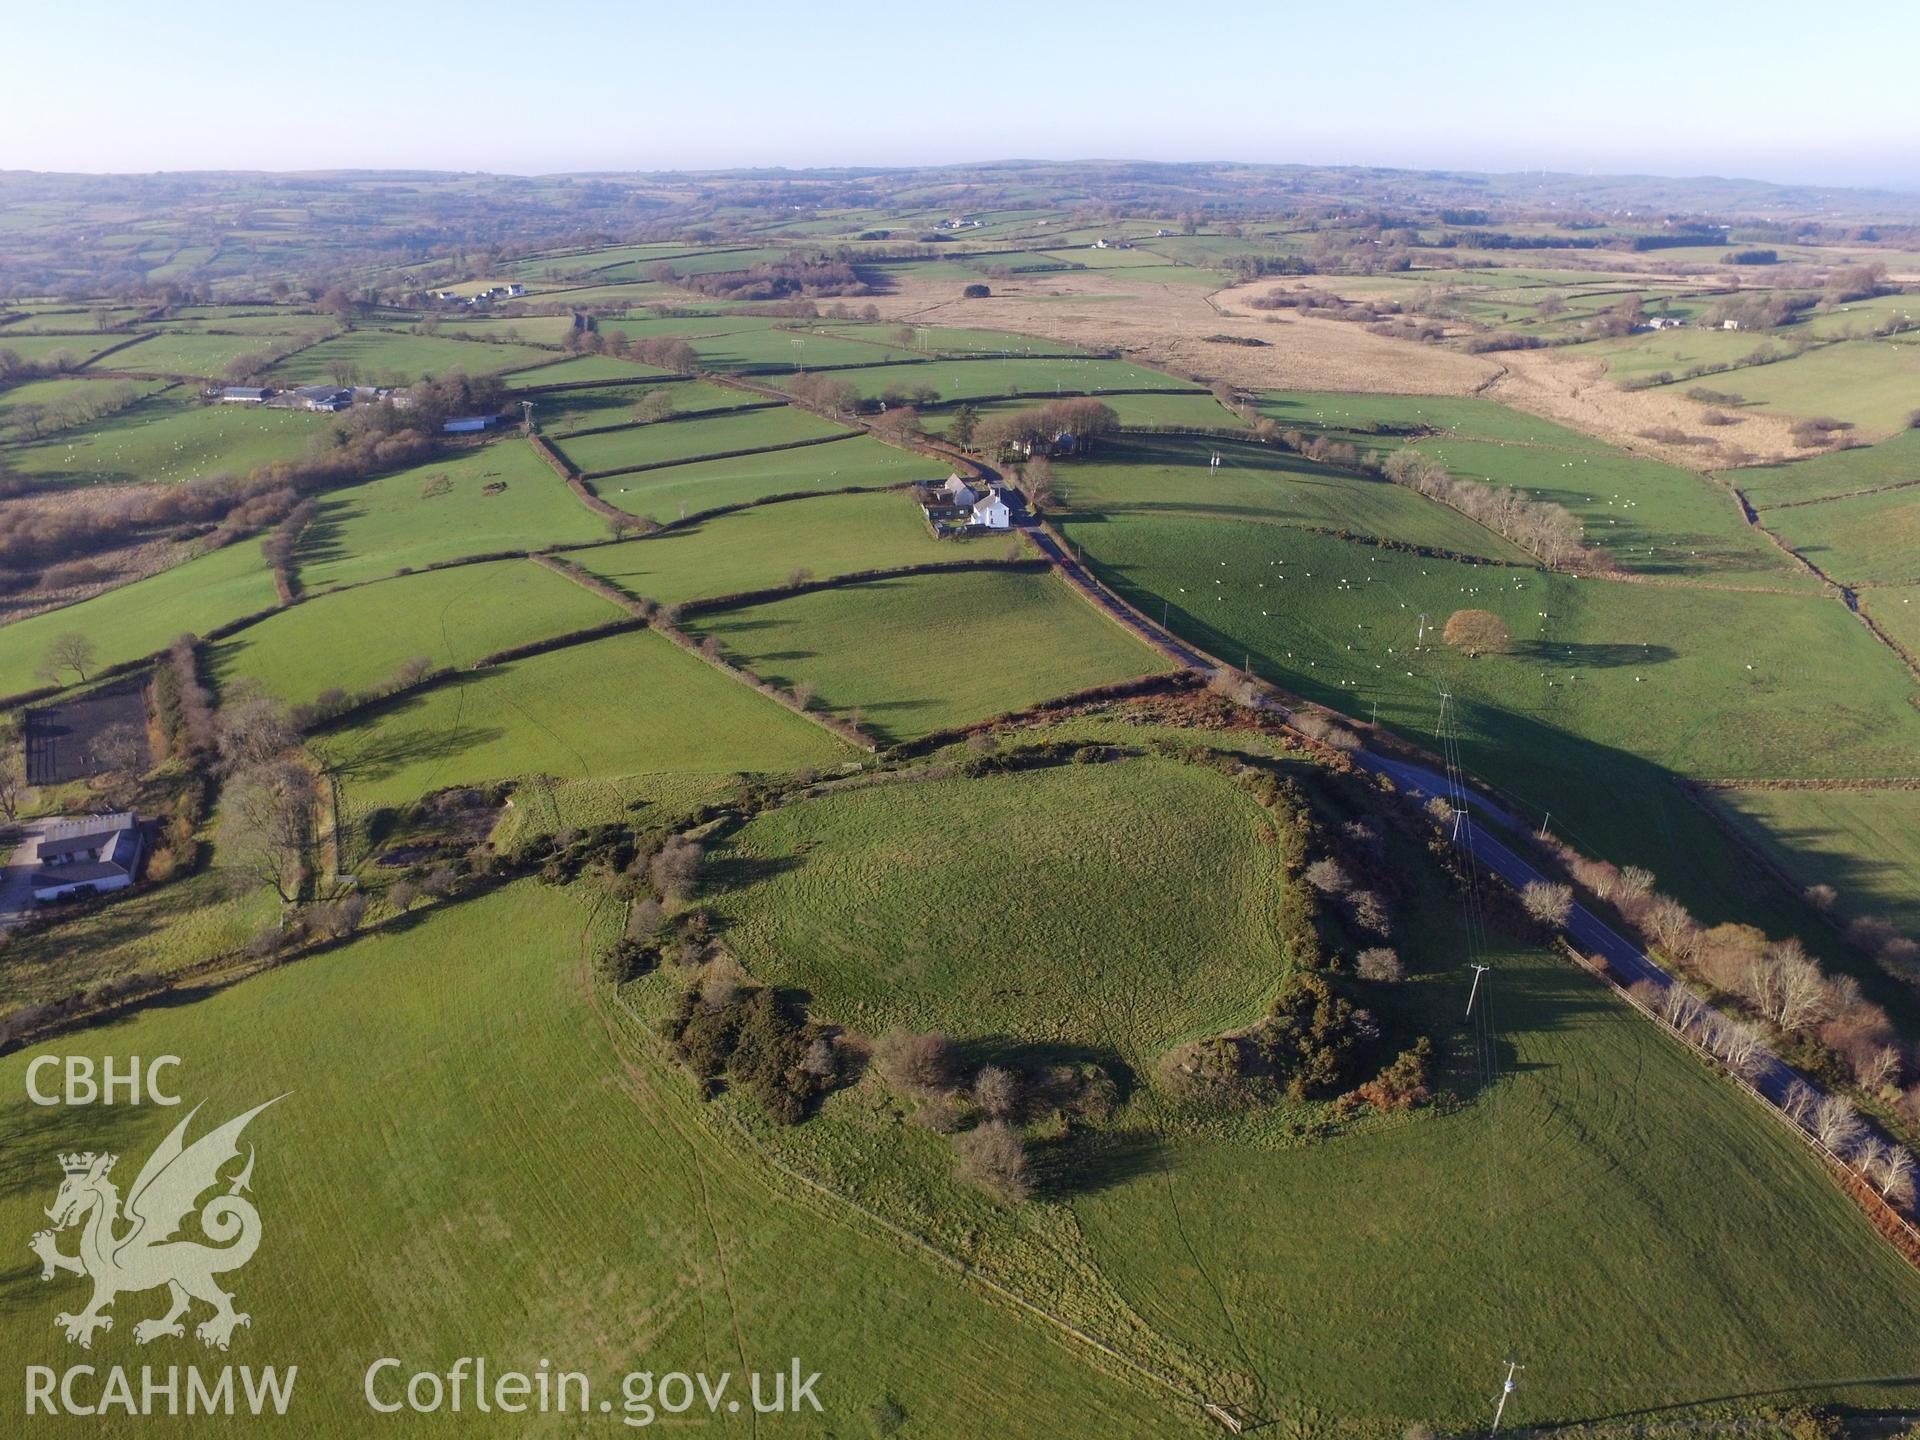 Aerial view from the south east of Castell Flemsih hillfort, Tregaron. Colour photograph taken by Paul R. Davis on 17th November 2018.